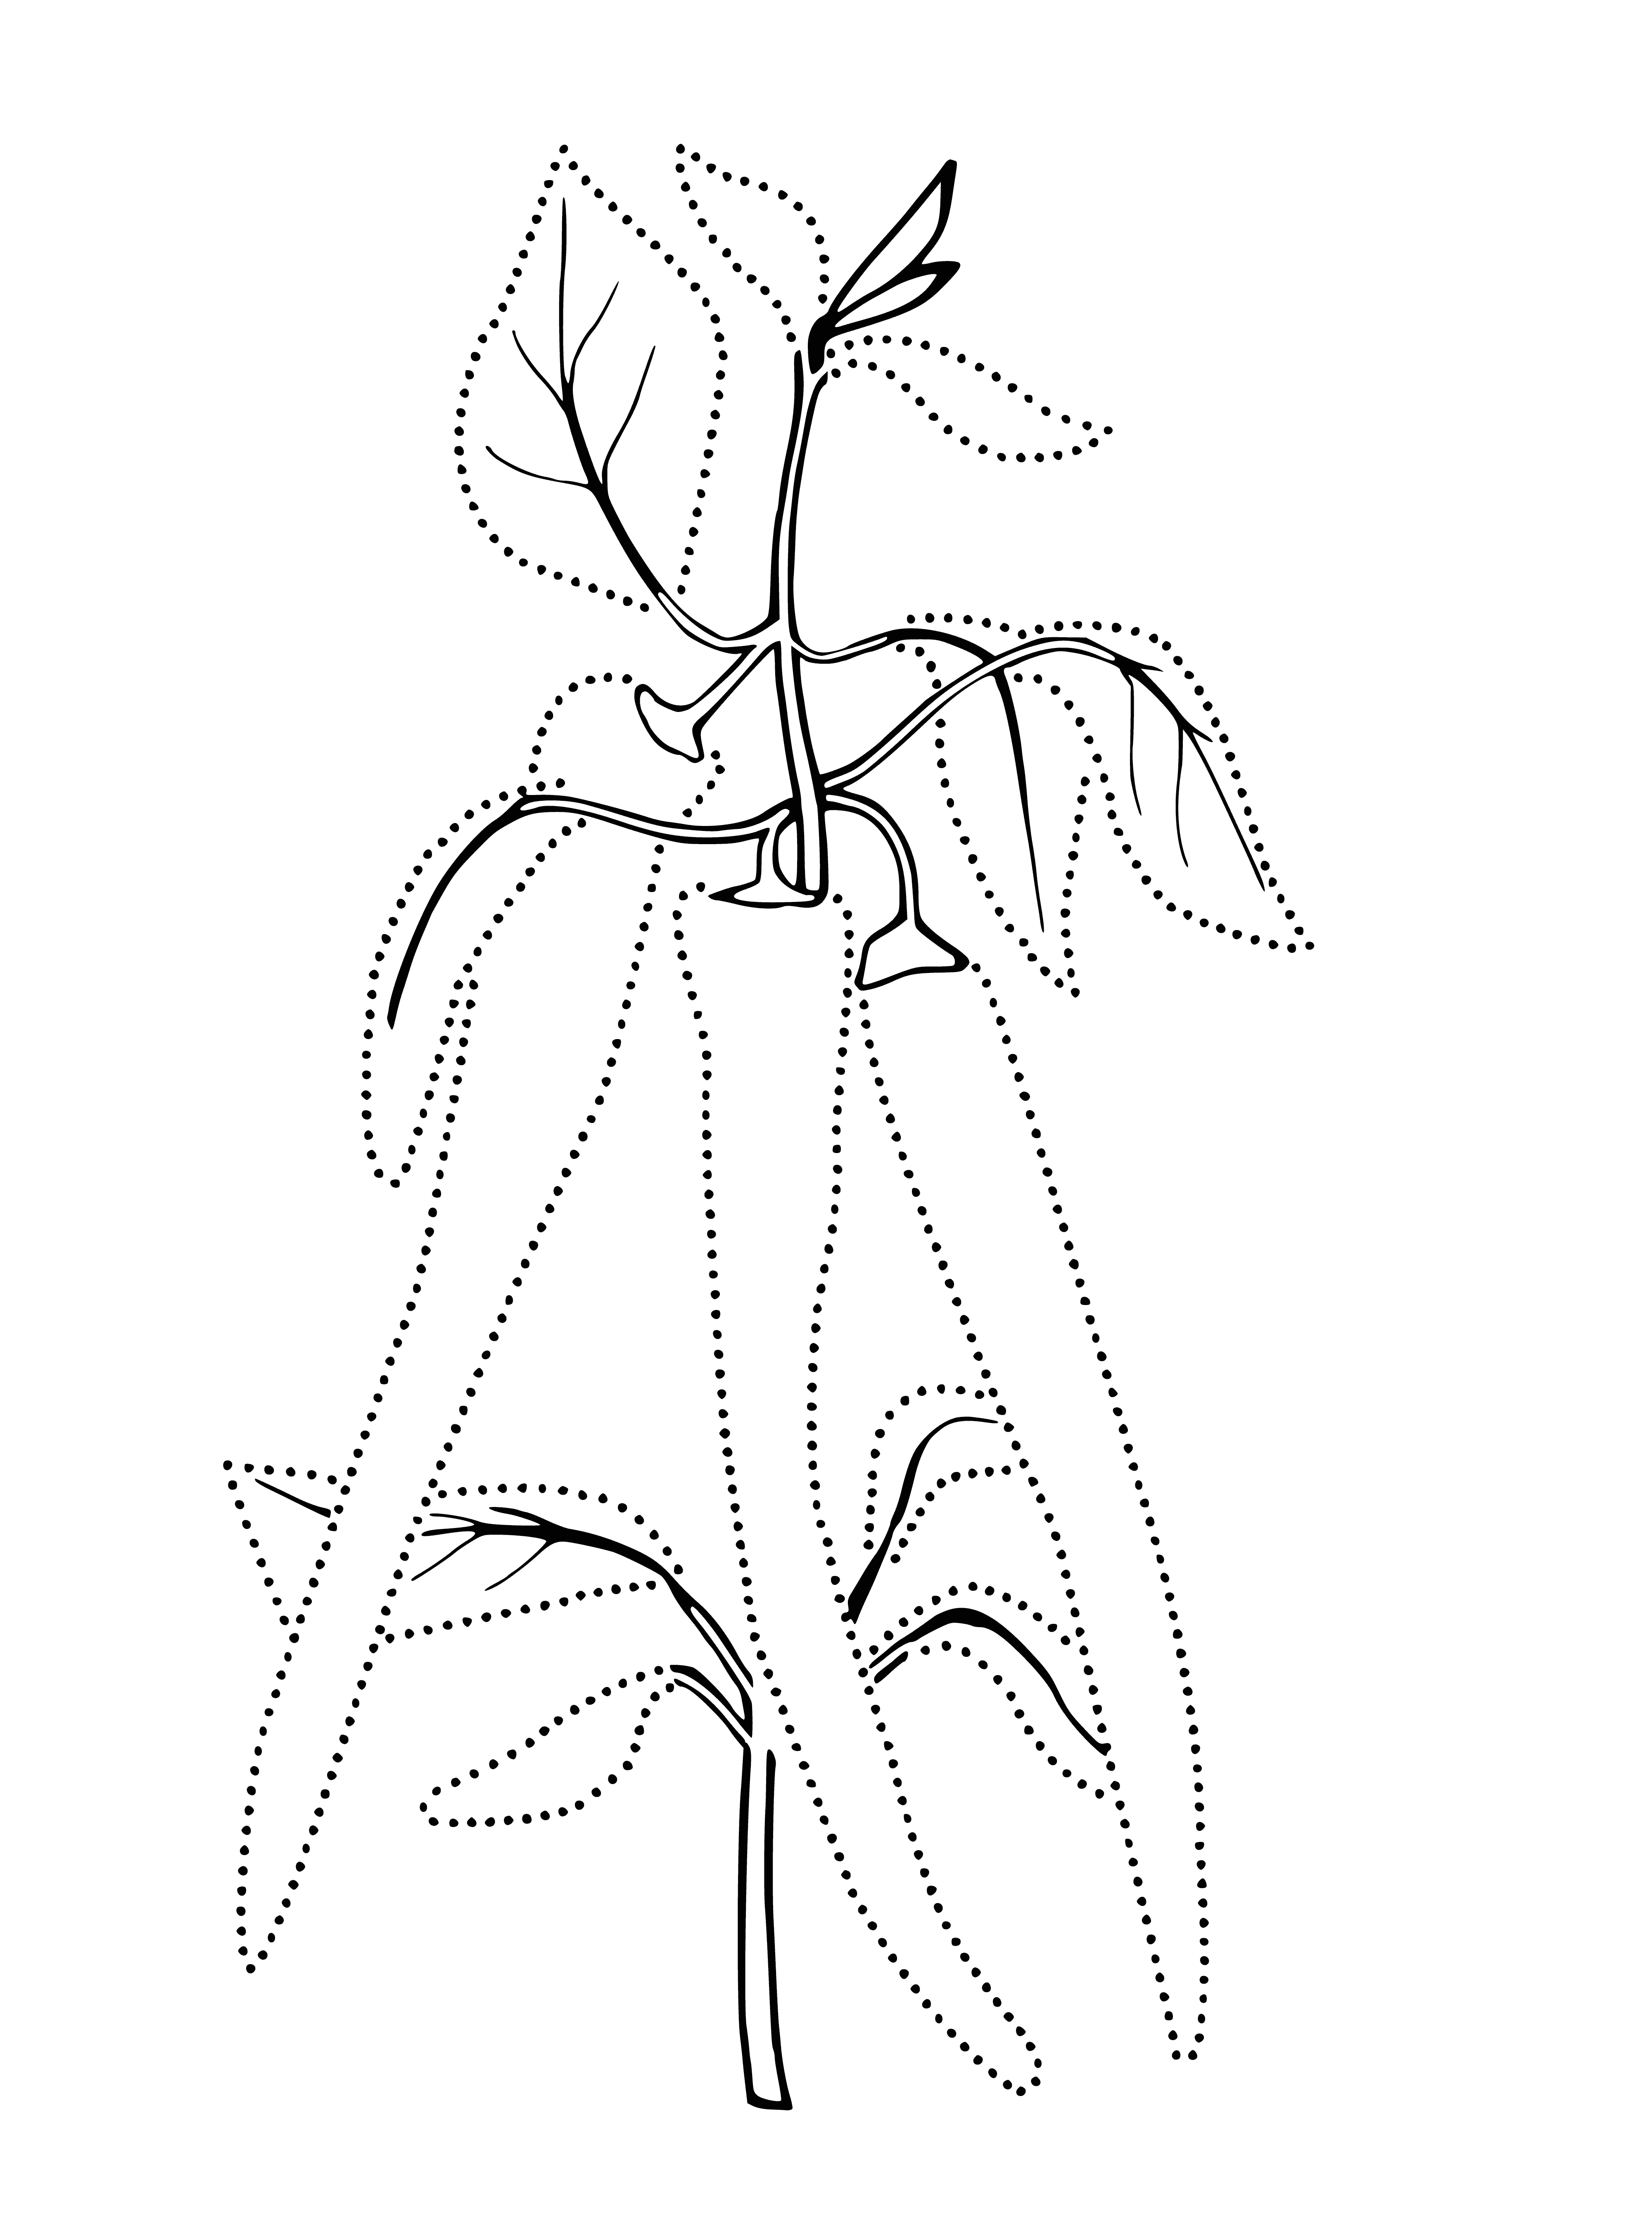 coloring page: Coloring pic of a green, slightly curved pepper with smooth surface & a stalk w/leaves attached. No blemishes. #Coloring